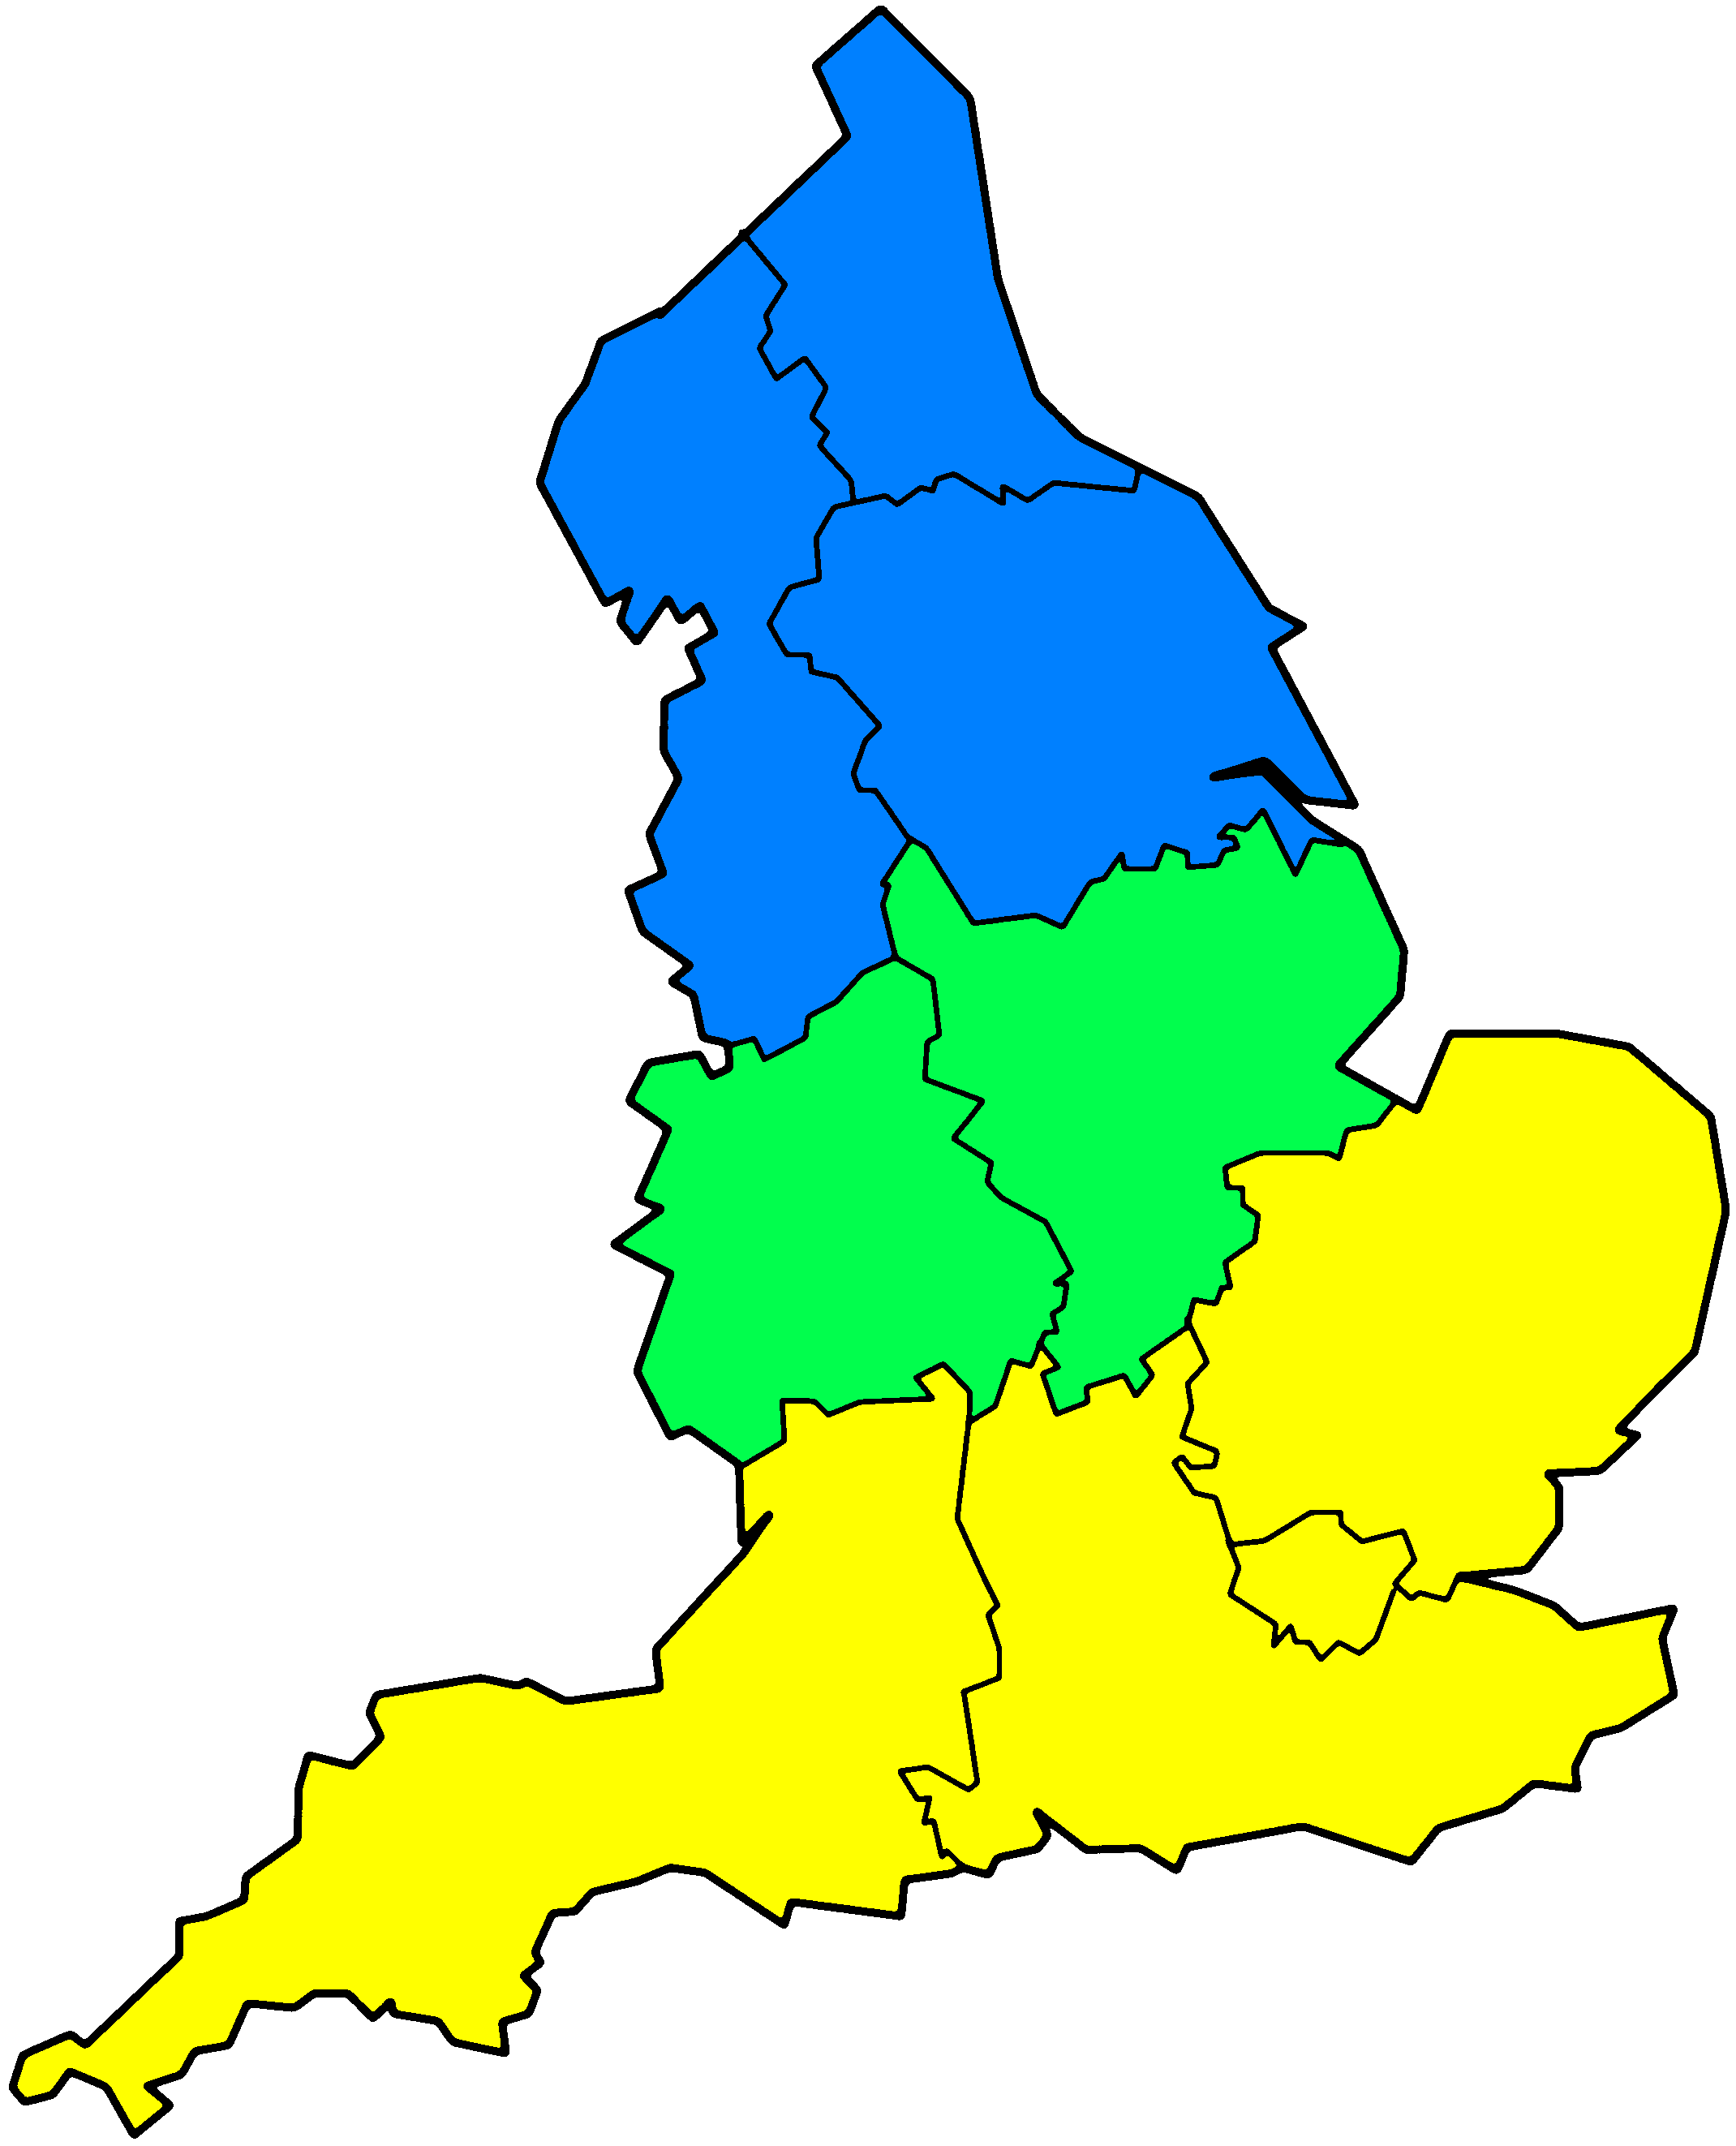 North–South divide (England)